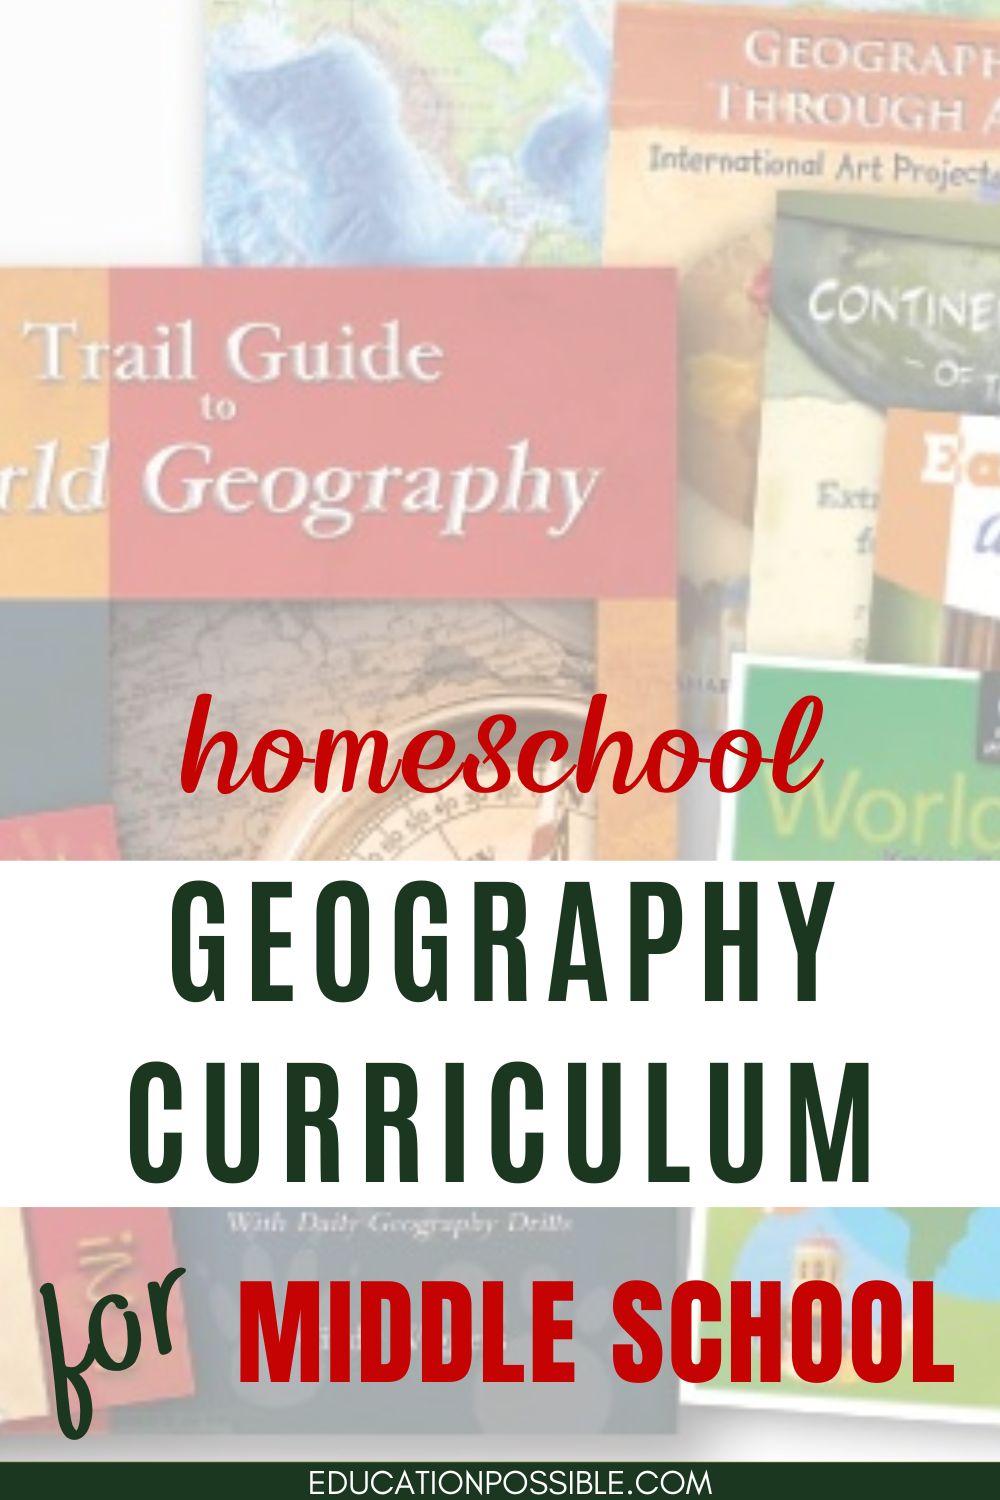 Faded image of Trail Guide to World Geography curriculum.